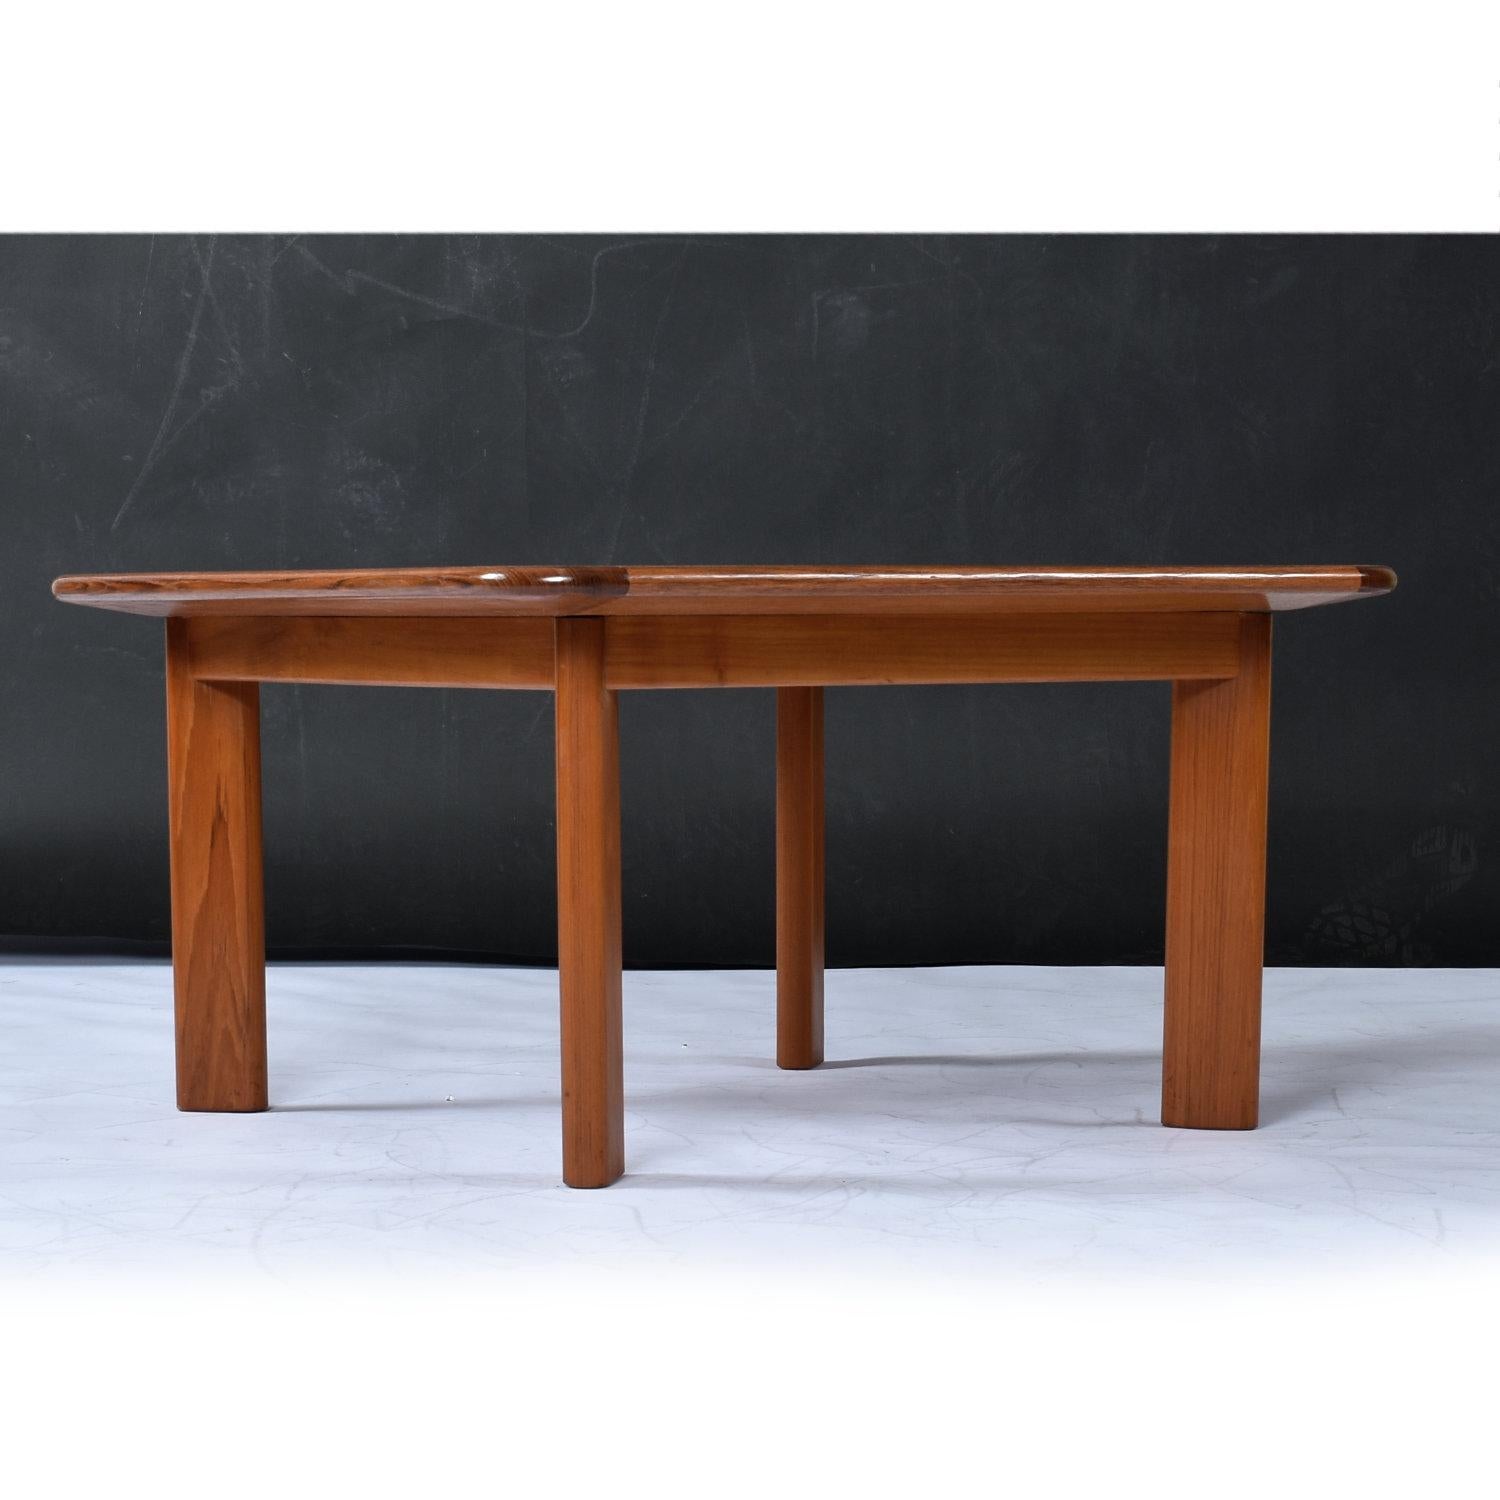 Late 20th Century Refinished Vintage Danish Modern Solid Teak Square Coffee Table For Sale